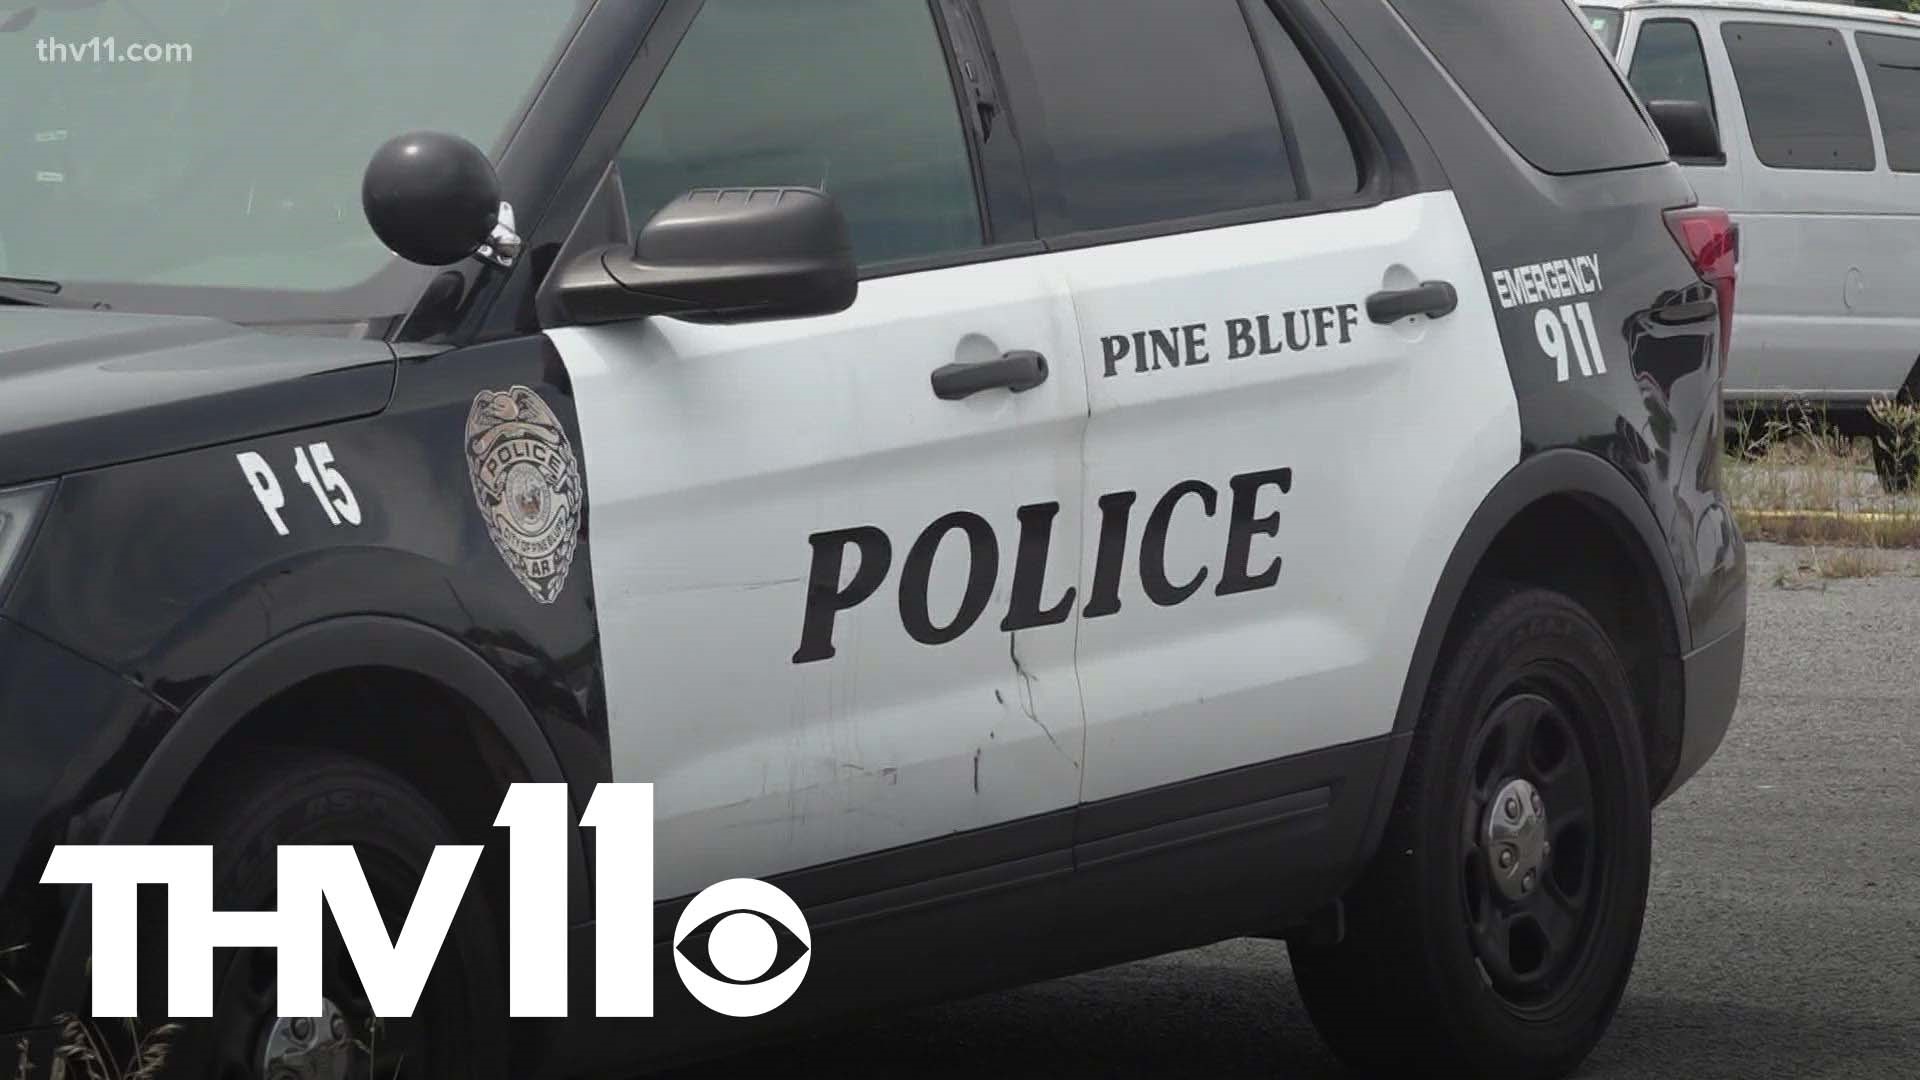 The Pine Bluff Police Department is investigating a fatal shooting incident involving a 24-year-old male that happened just after 3:00 a.m.